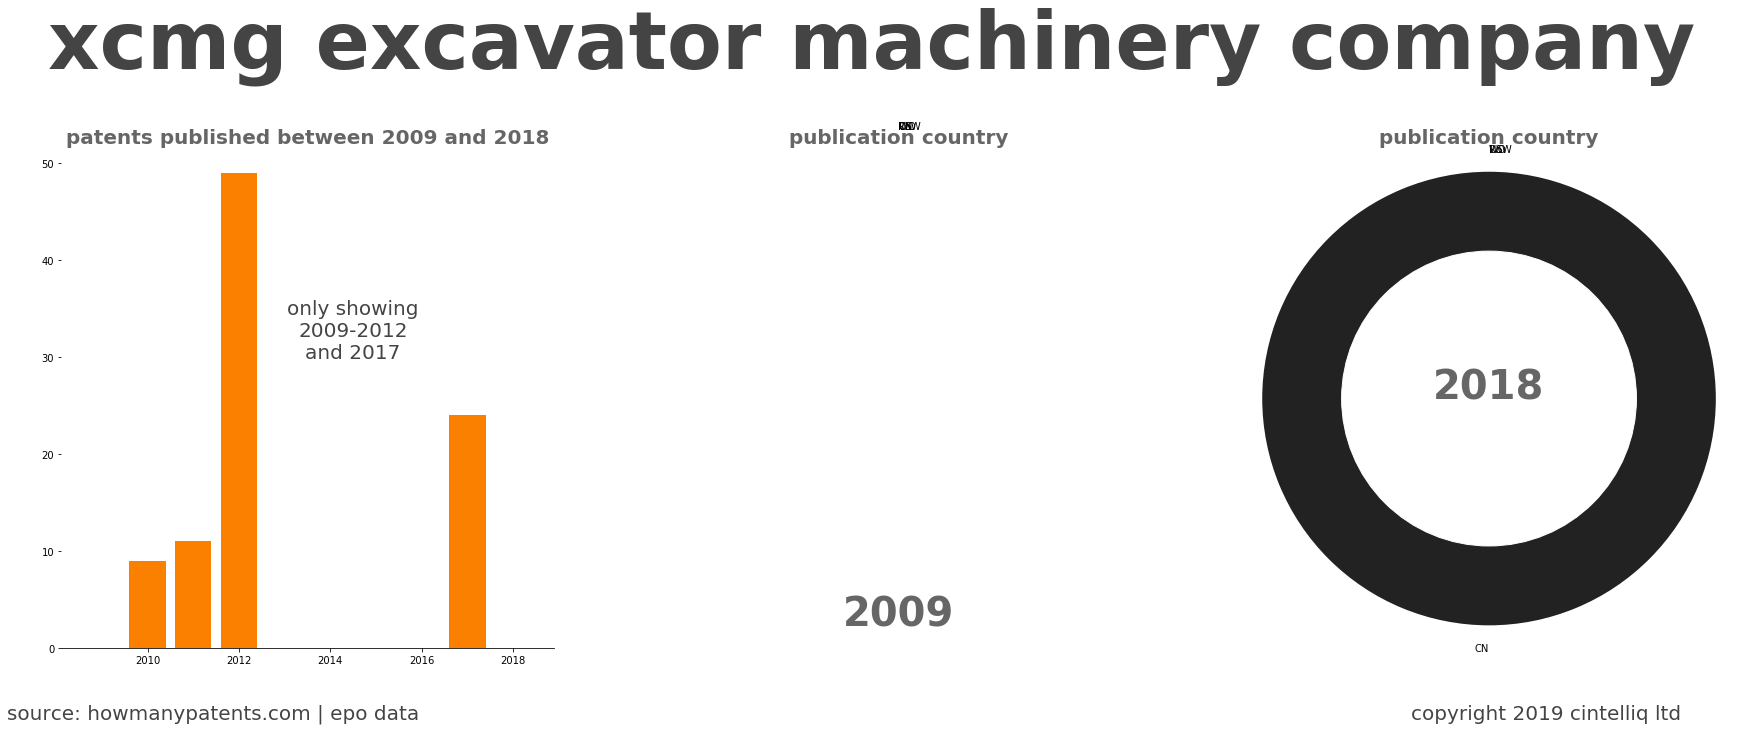 summary of patents for Xcmg Excavator Machinery Company